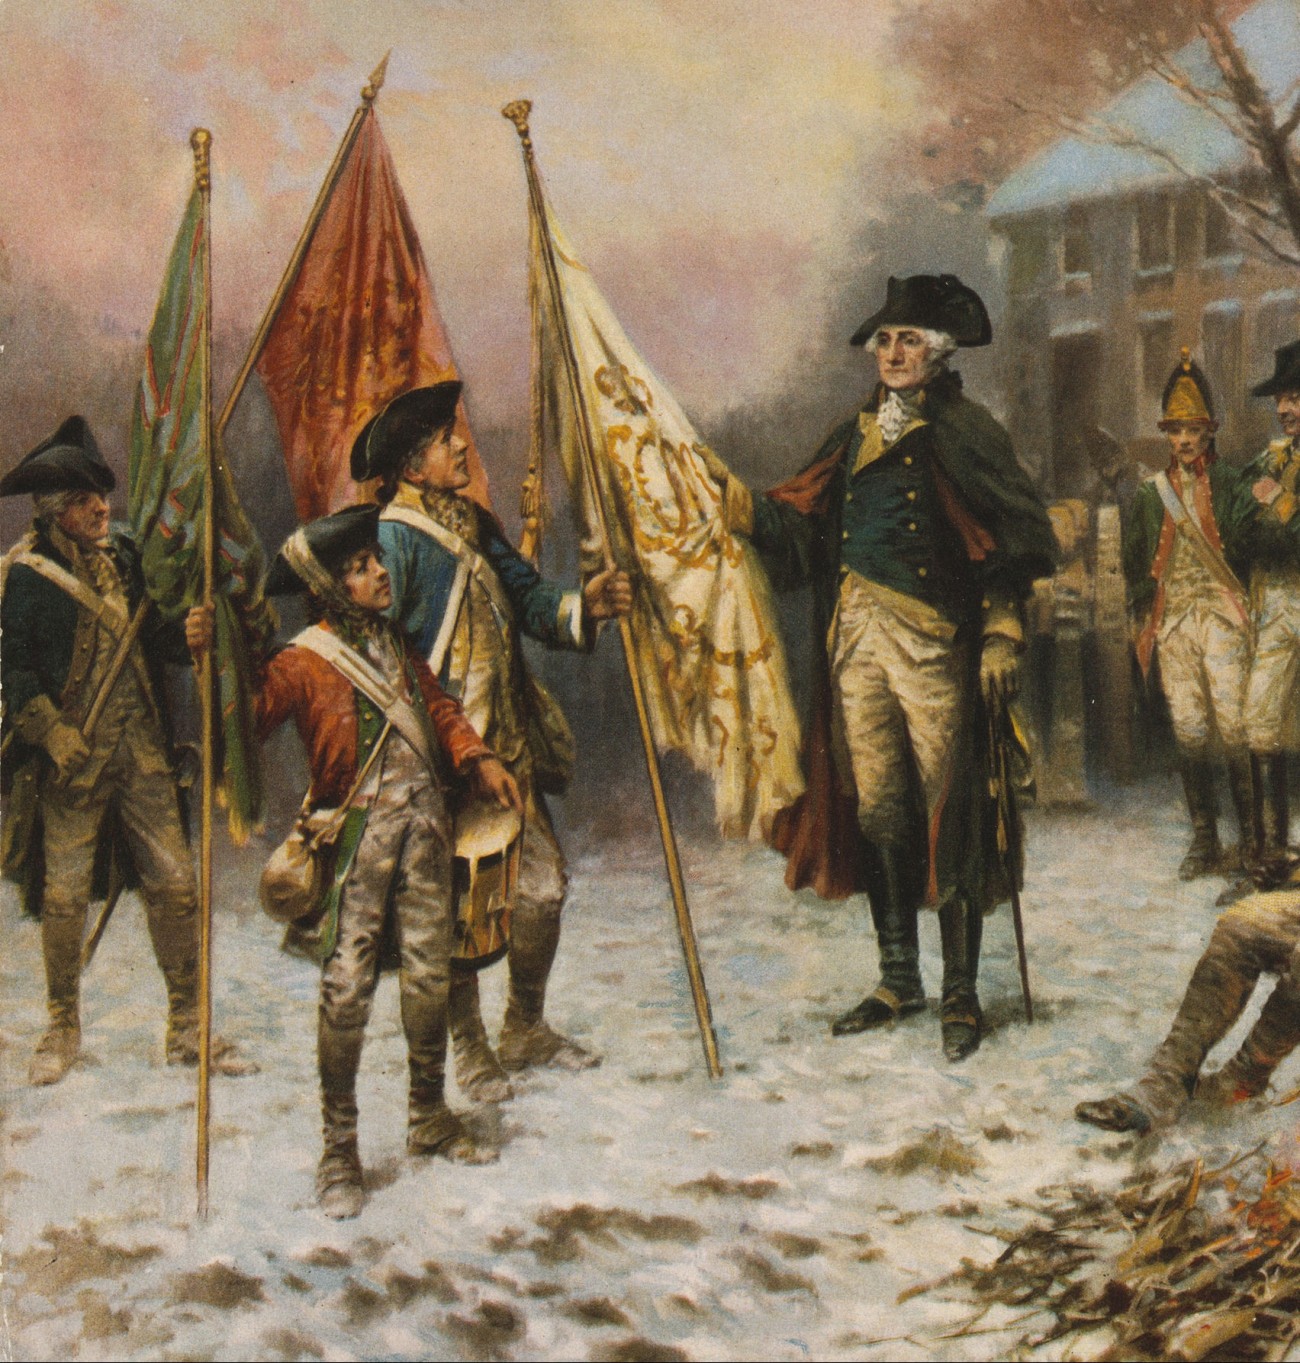 George Washington’s “vision” at Valley Forge